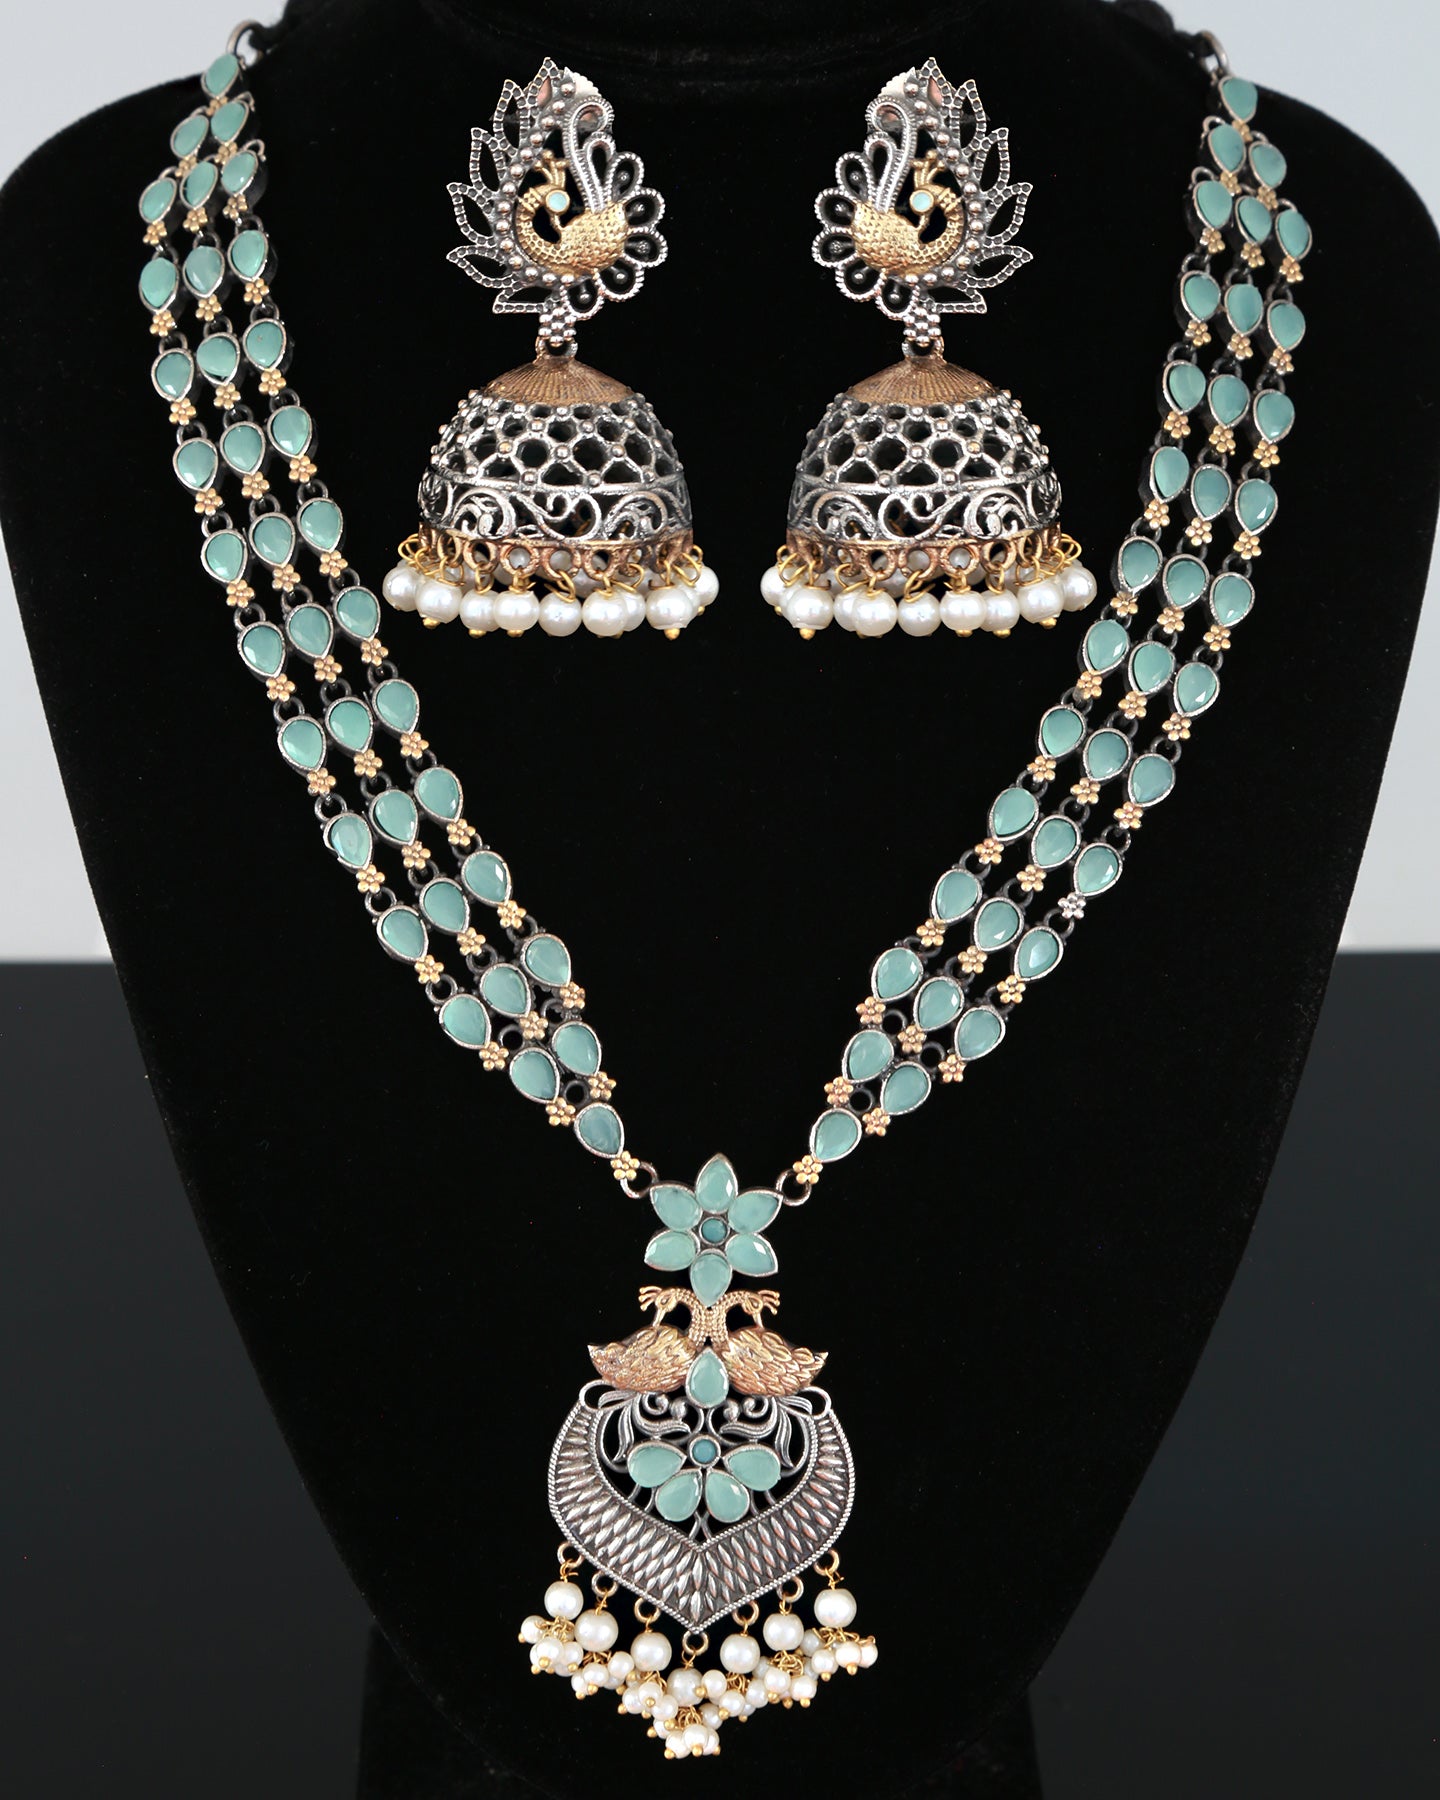 Dual tone German Silver Necklace Earring set | Antique Gold and Oxidized Silver look Color stone Necklace and Jhumka Earrings | Indian Saree jewelry